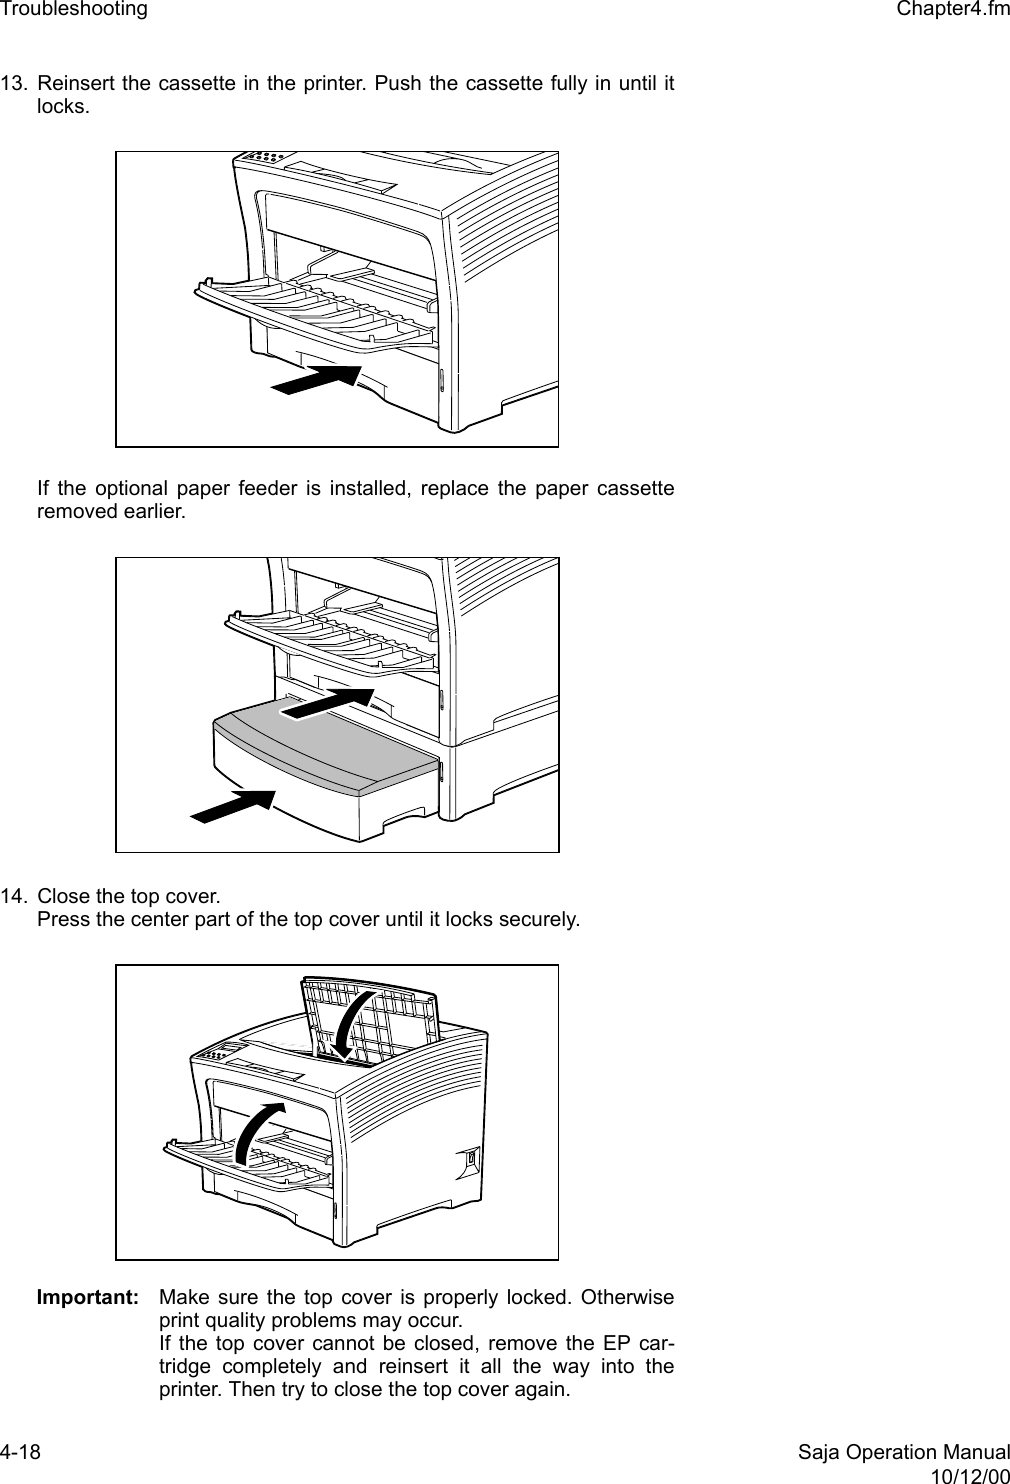 4-18 Saja Operation Manual10/12/00Troubleshooting  Chapter4.fm13. Reinsert the cassette in the printer. Push the cassette fully in until itlocks. If the optional paper feeder is installed, replace the paper cassetteremoved earlier. 14. Close the top cover.Press the center part of the top cover until it locks securely.Important: Make sure the top cover is properly locked. Otherwiseprint quality problems may occur. If the top cover cannot be closed, remove the EP car-tridge completely and reinsert it all the way into theprinter. Then try to close the top cover again.